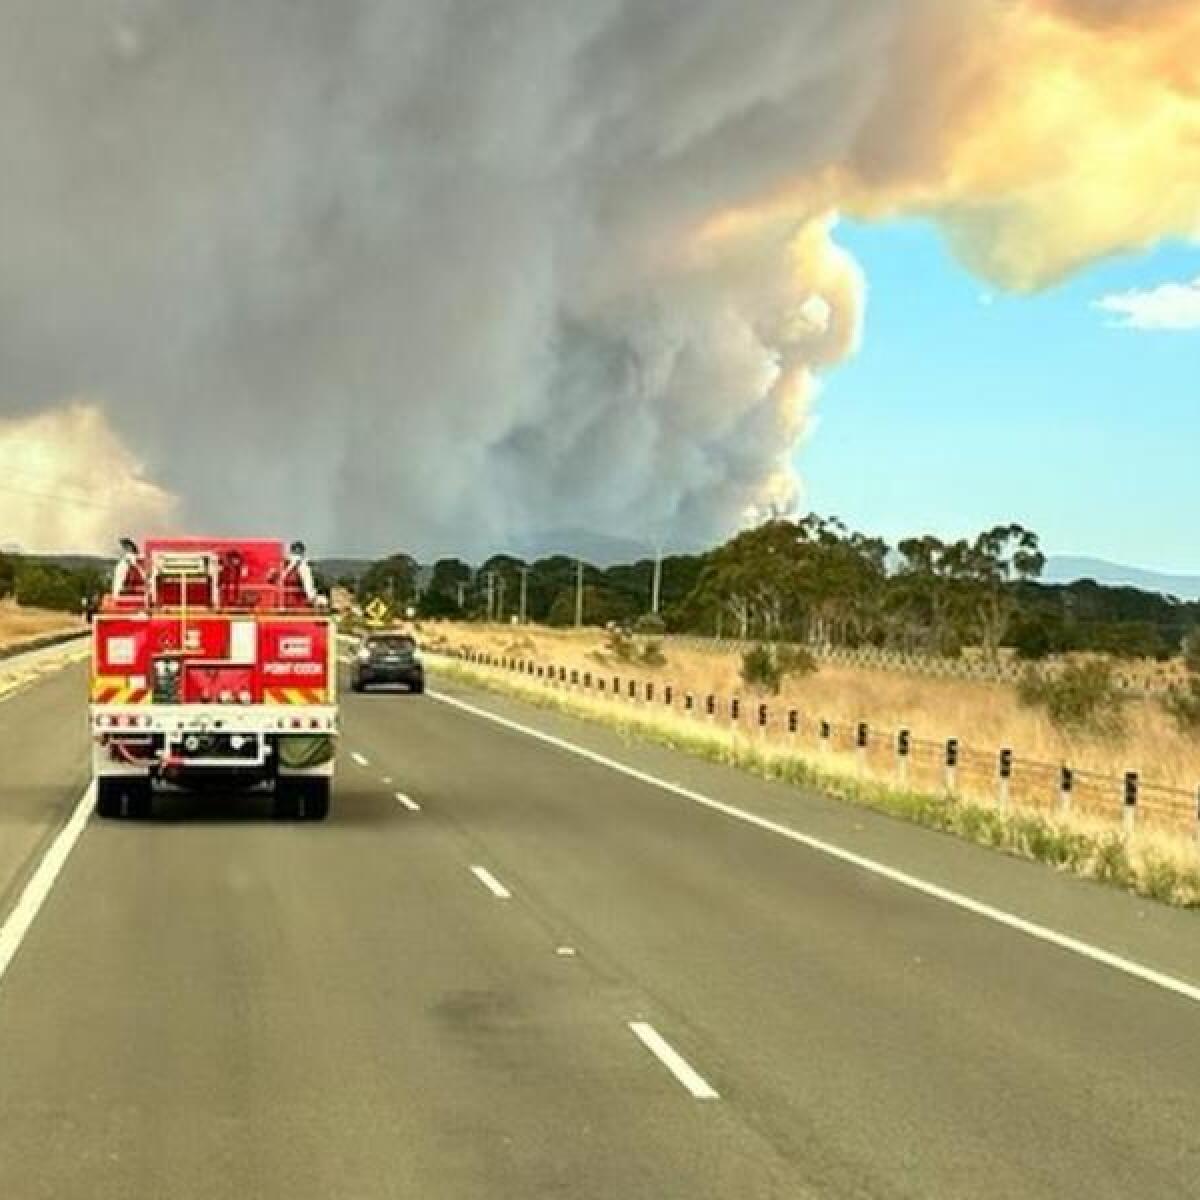 Firefighters near a fire in Eastern Maar Country, Victoria